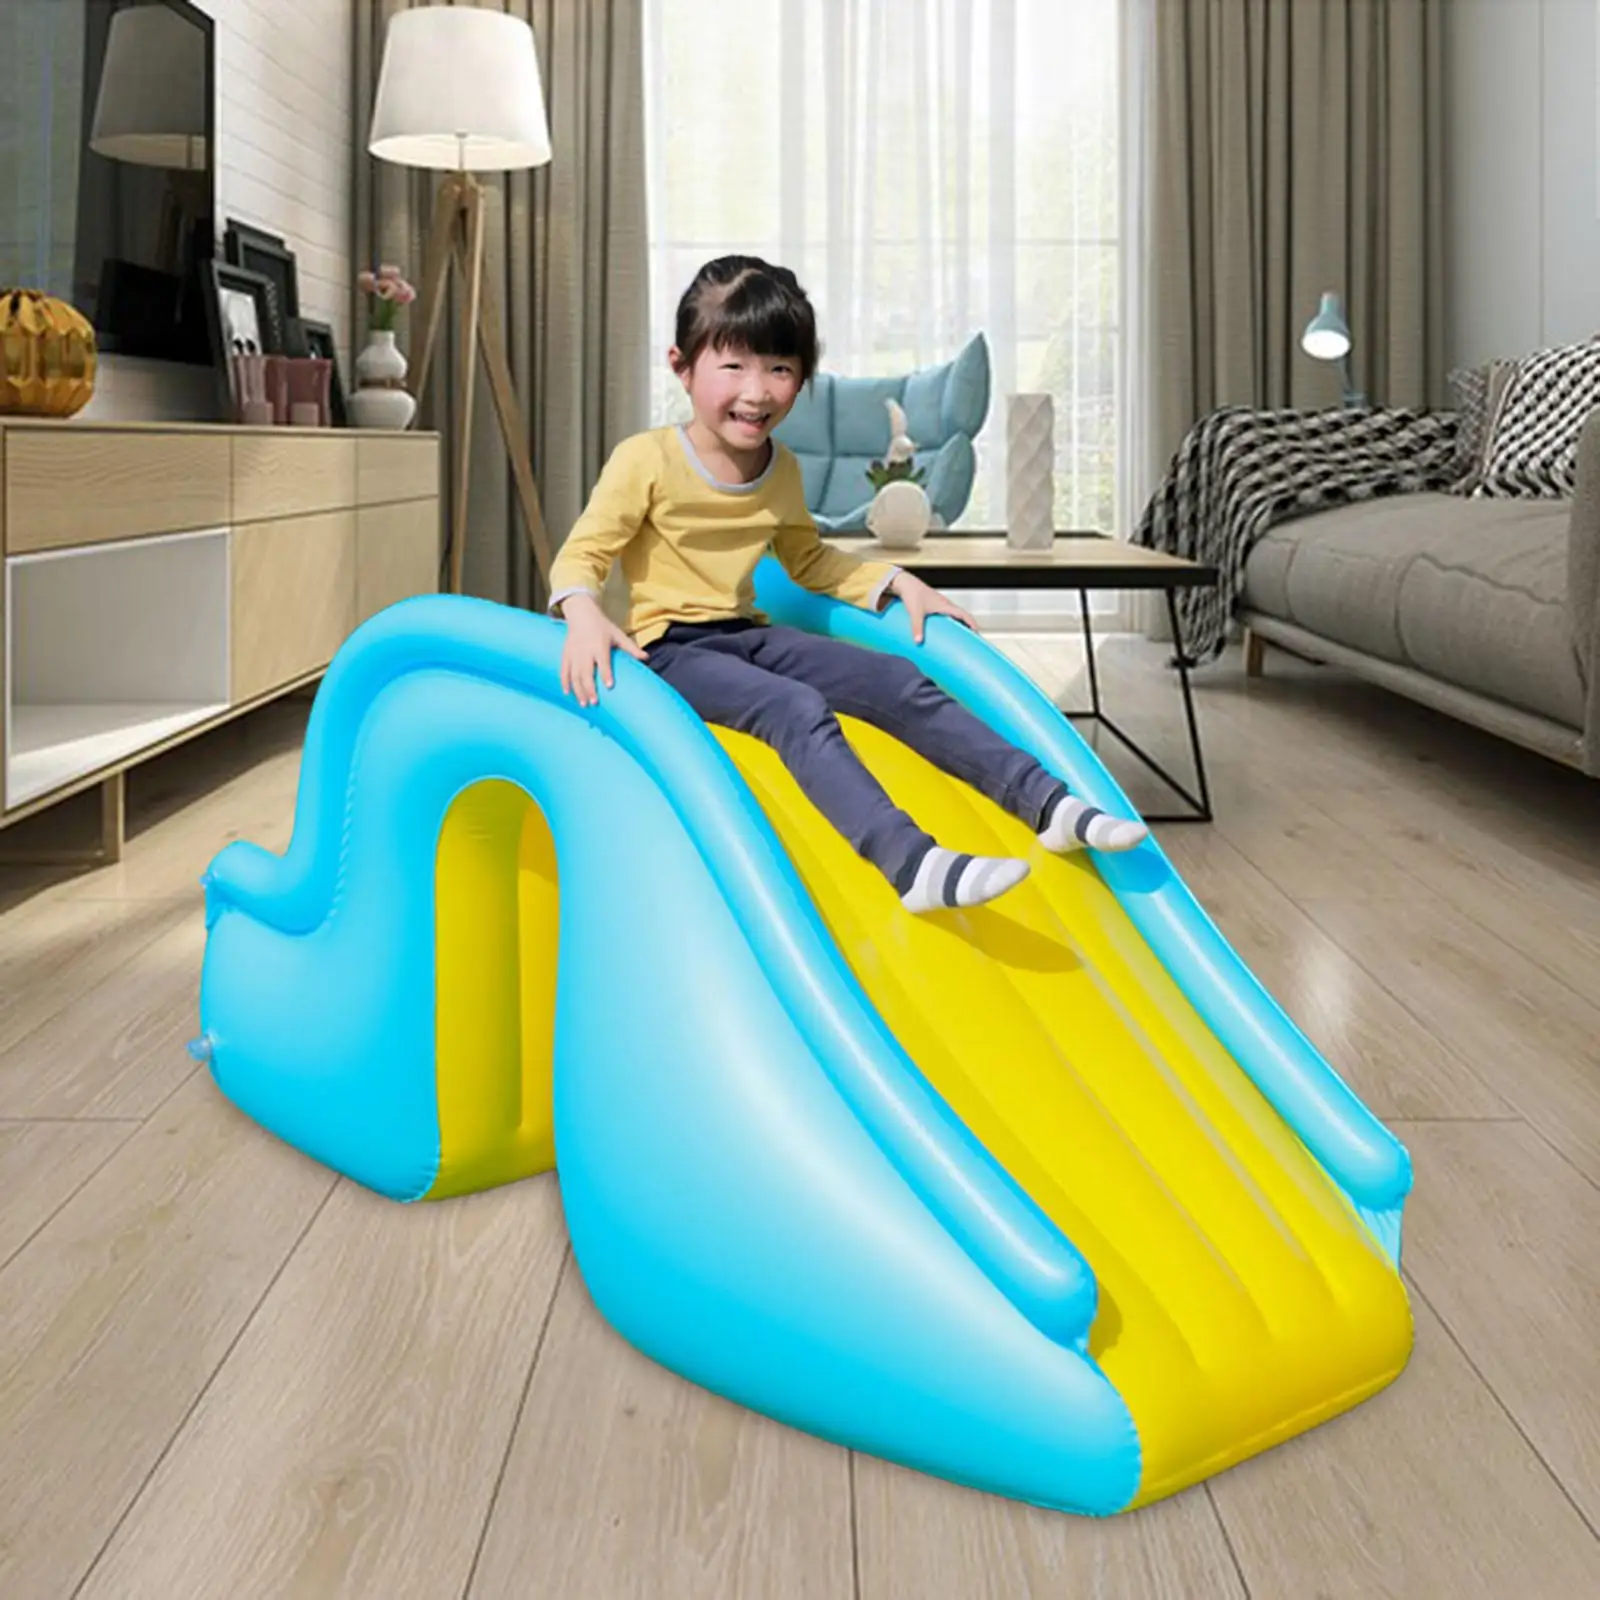 Inflatable Pool Slide Anti Slip Steps Folding PVC Toddler Slide for Yard Paddling Pool Outdoor above Ground Pool Water Play Toys